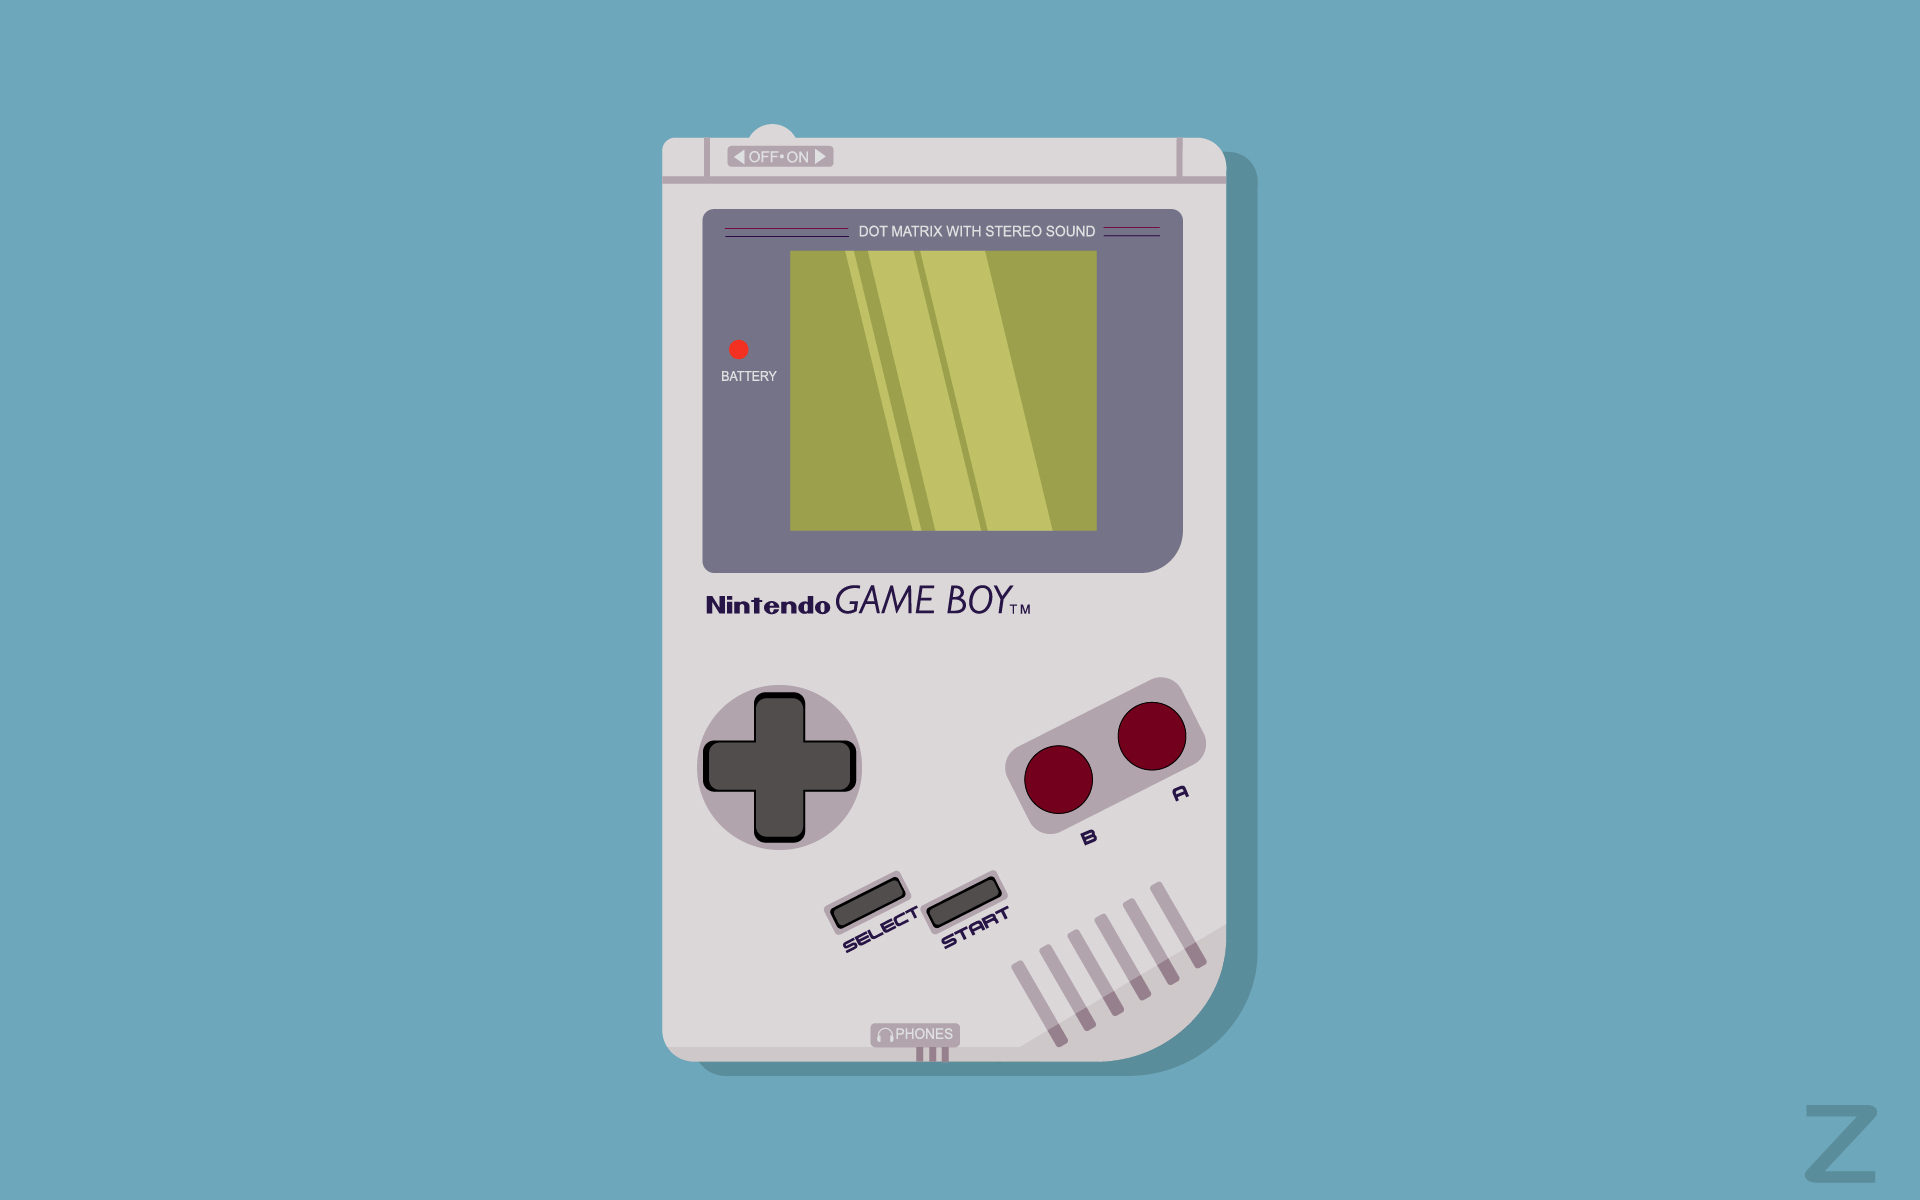 gameboy - Off.On Dot Matrix With Stereo Sound Battery Nintendo Game BoyM A Select Start Phones N